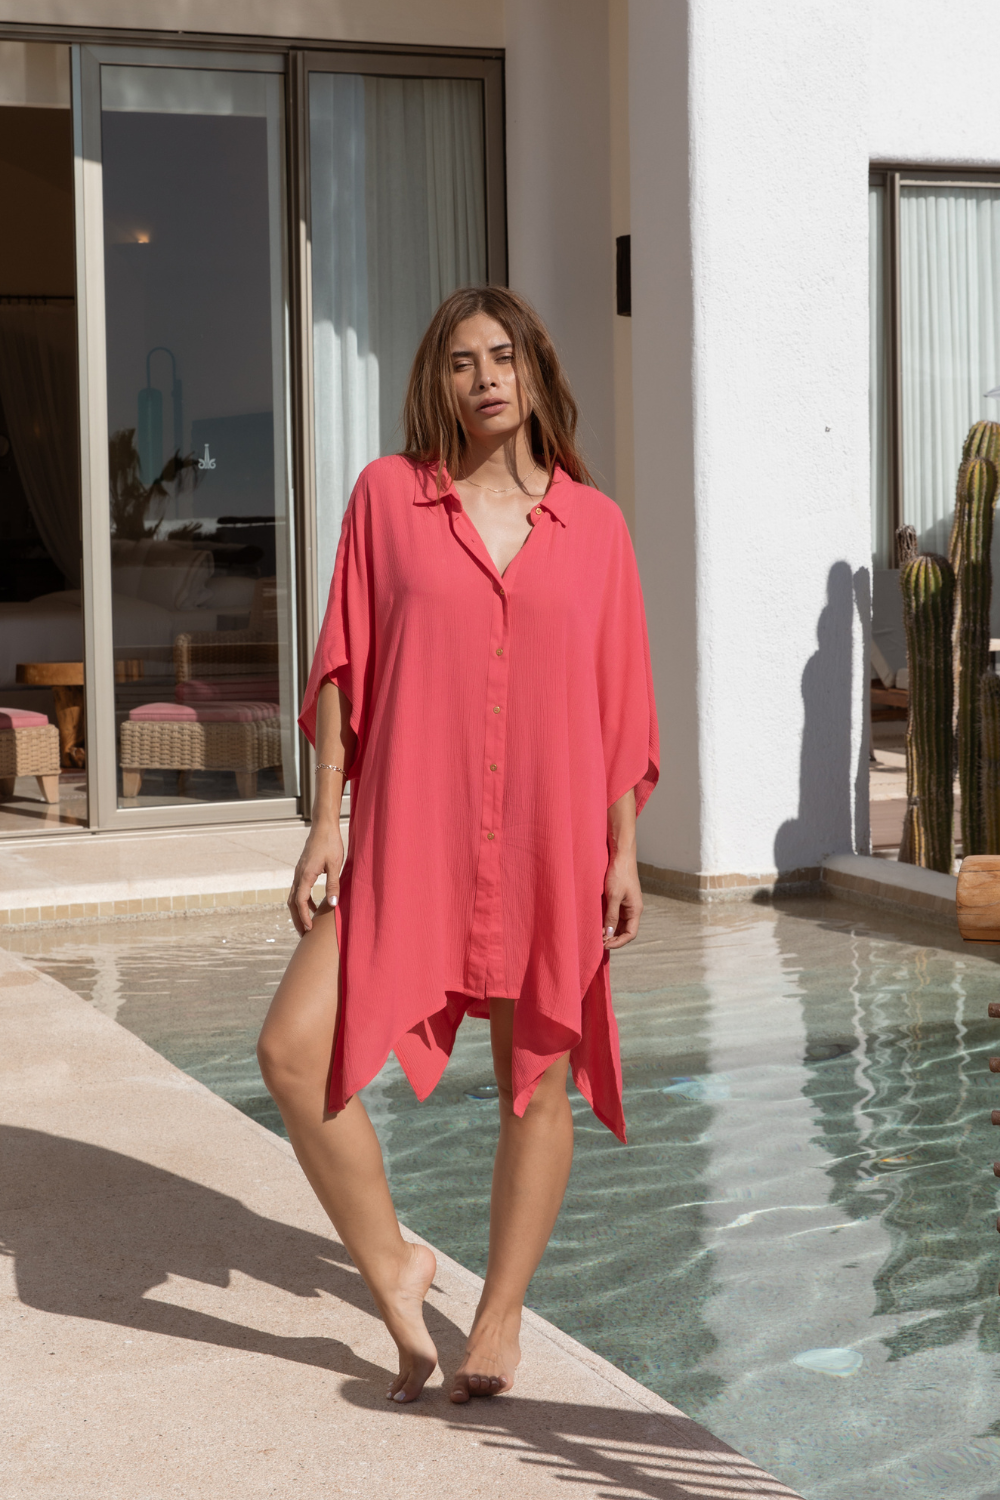 Miami Big Shirt Button Up Dress in guava pink worn in cabo mexico